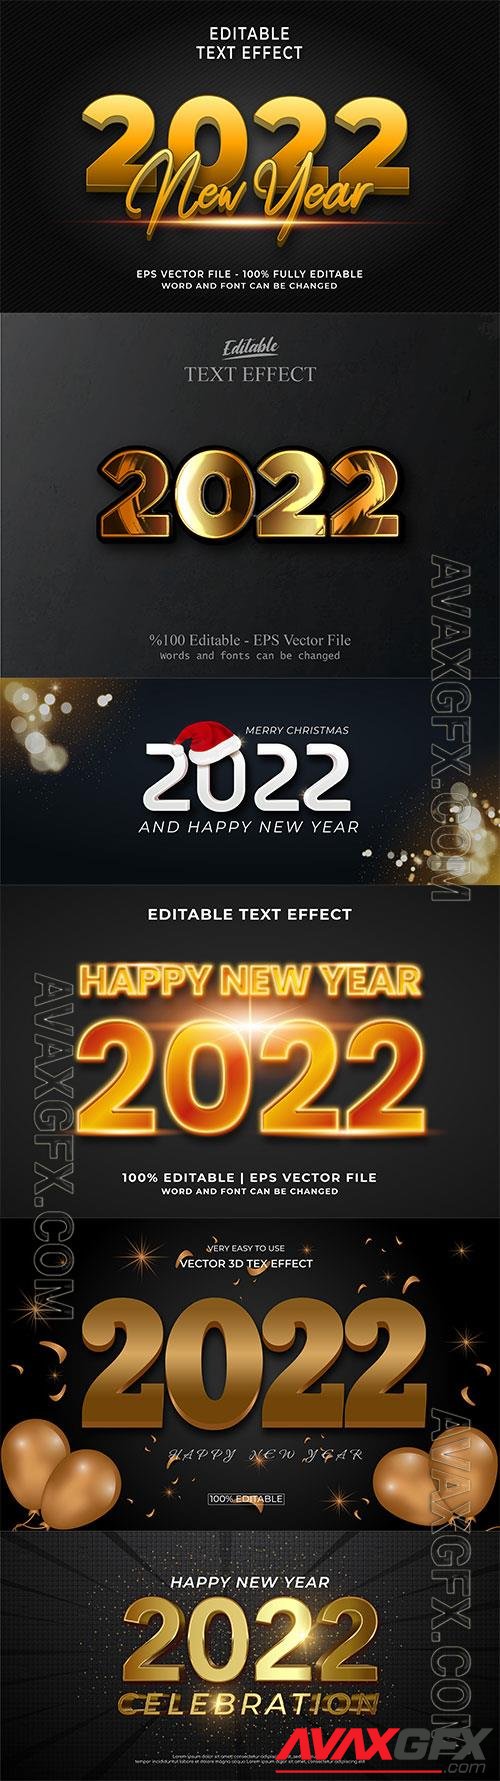 Merry christmas and happy new year 2022 editable vector text effects vol 2